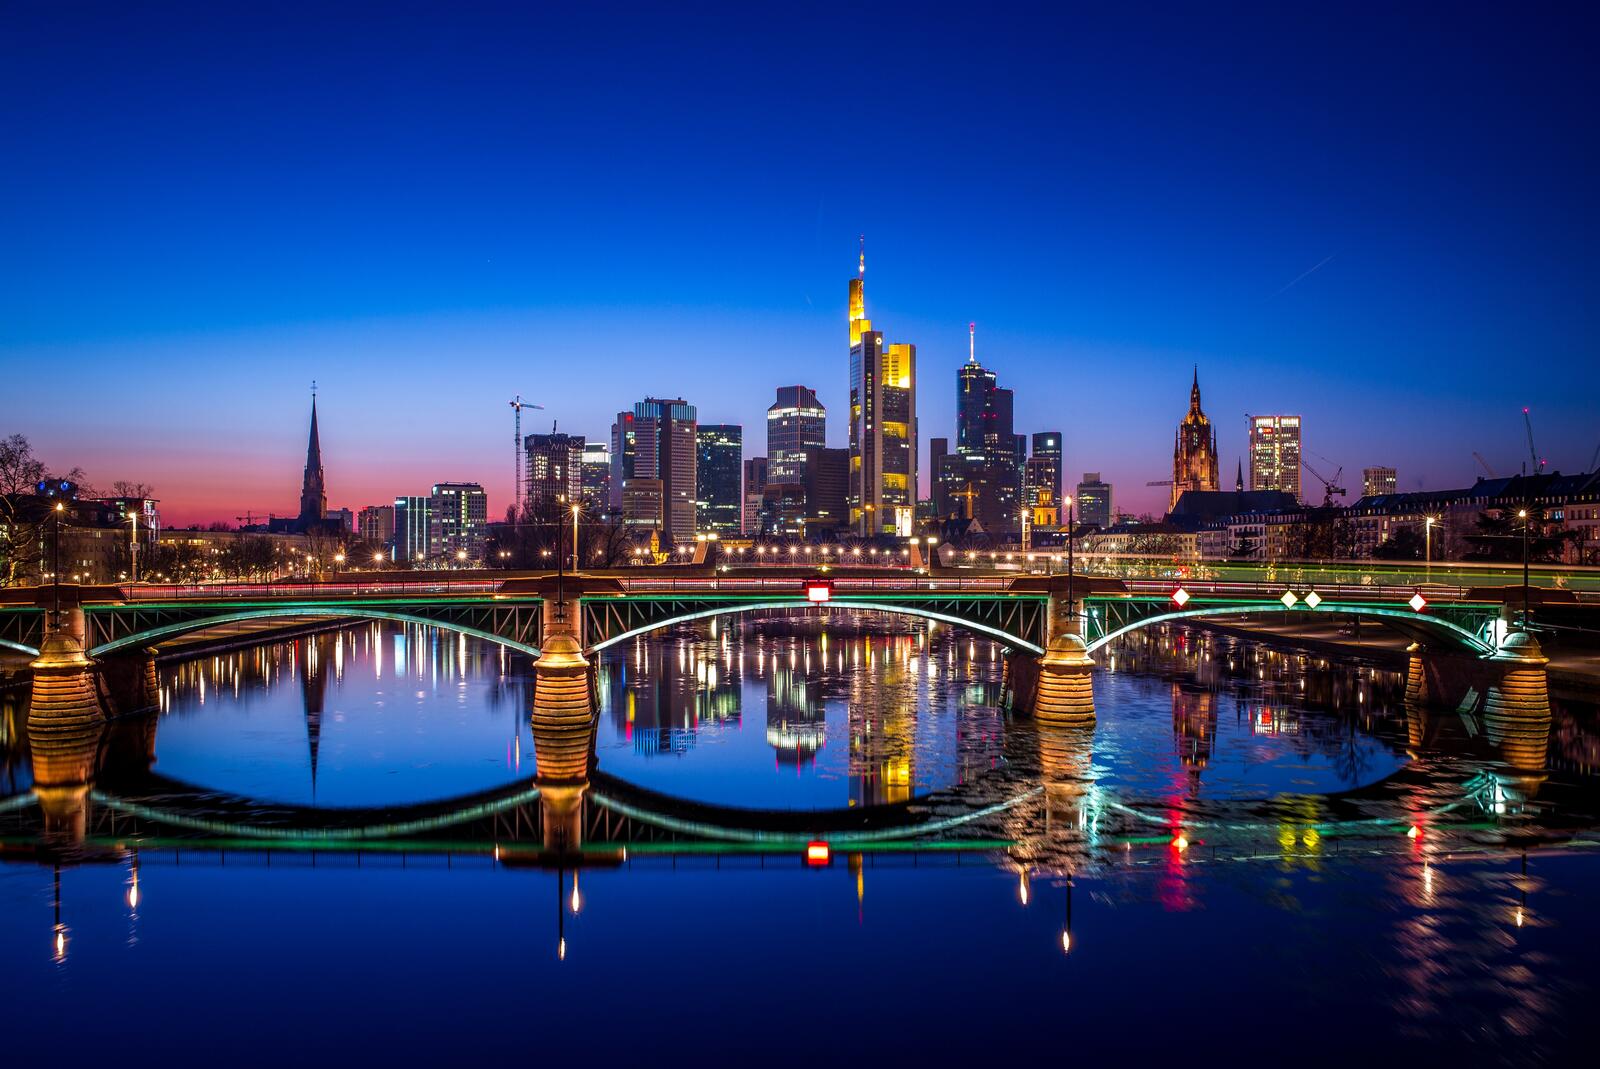 Free photo Evening bridge over a river in Germany